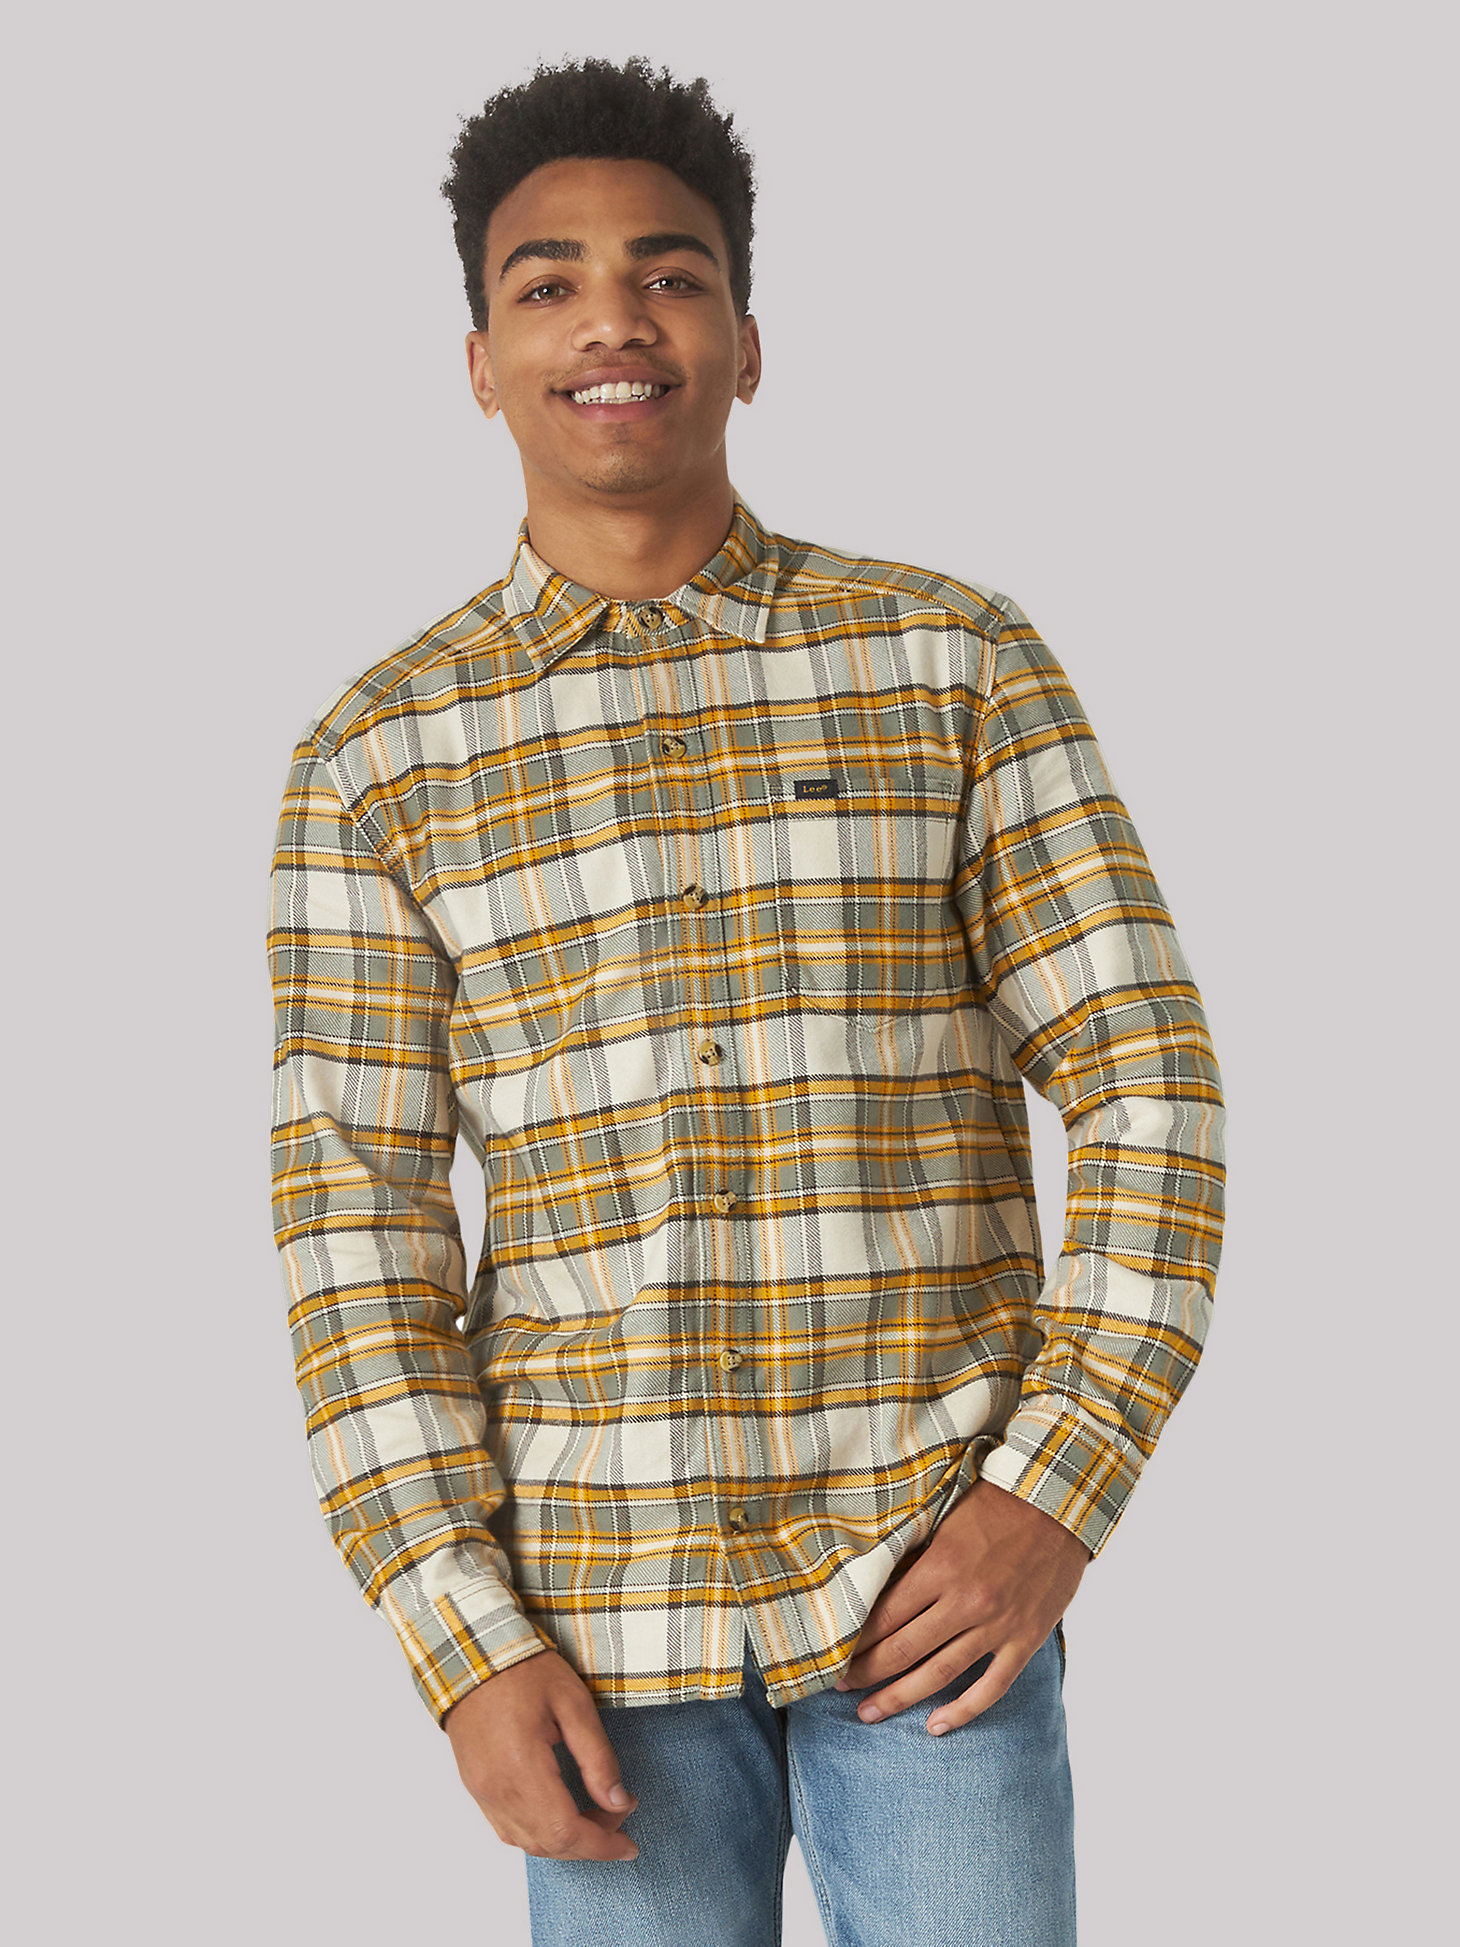 Men's Heritage Flannel Plaid Button Down Shirt in Yellow Grey Flannel main view